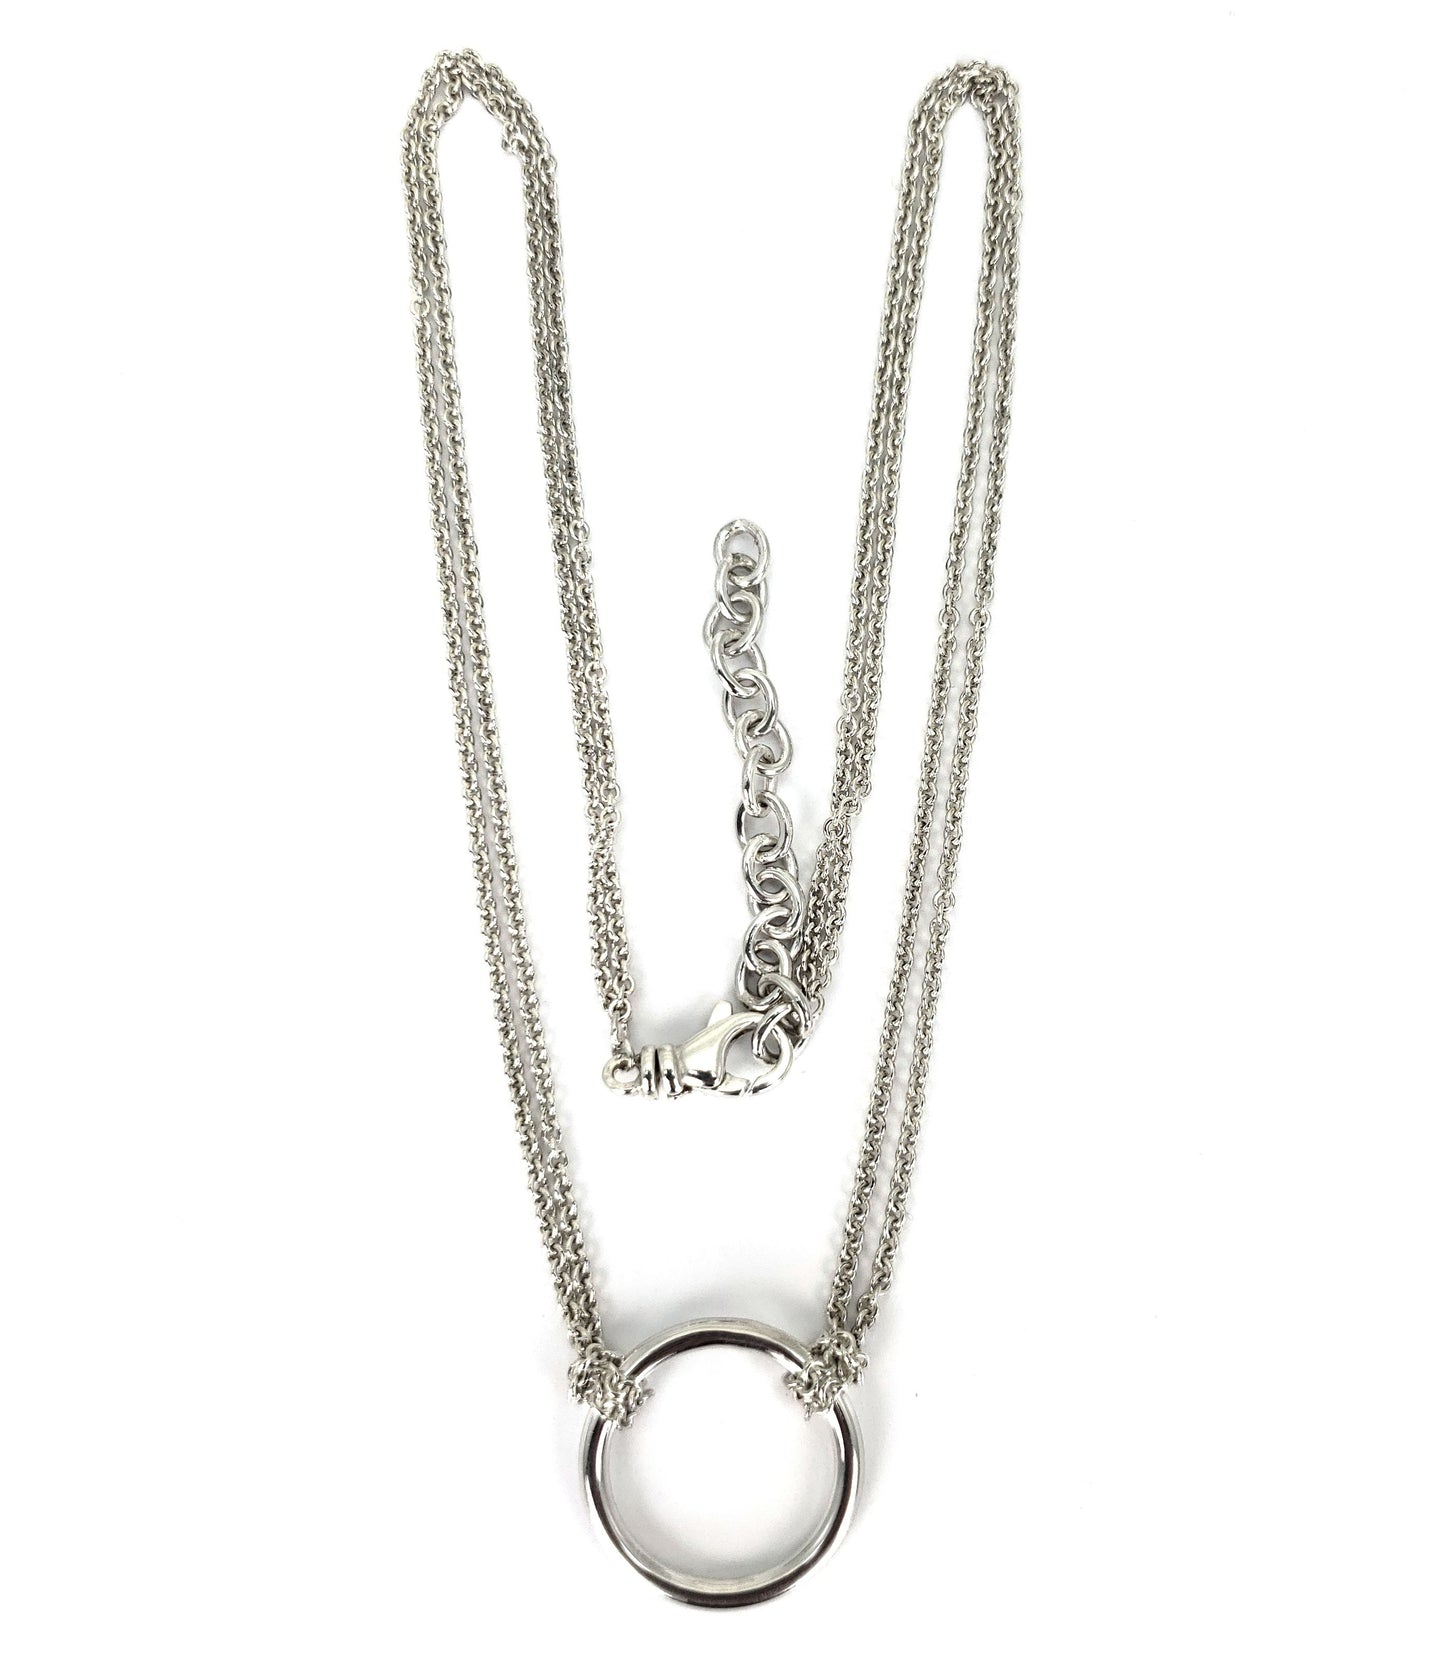 N109 SURA .925 Sterling Silver Two Strand Chain Necklace with Center Ring